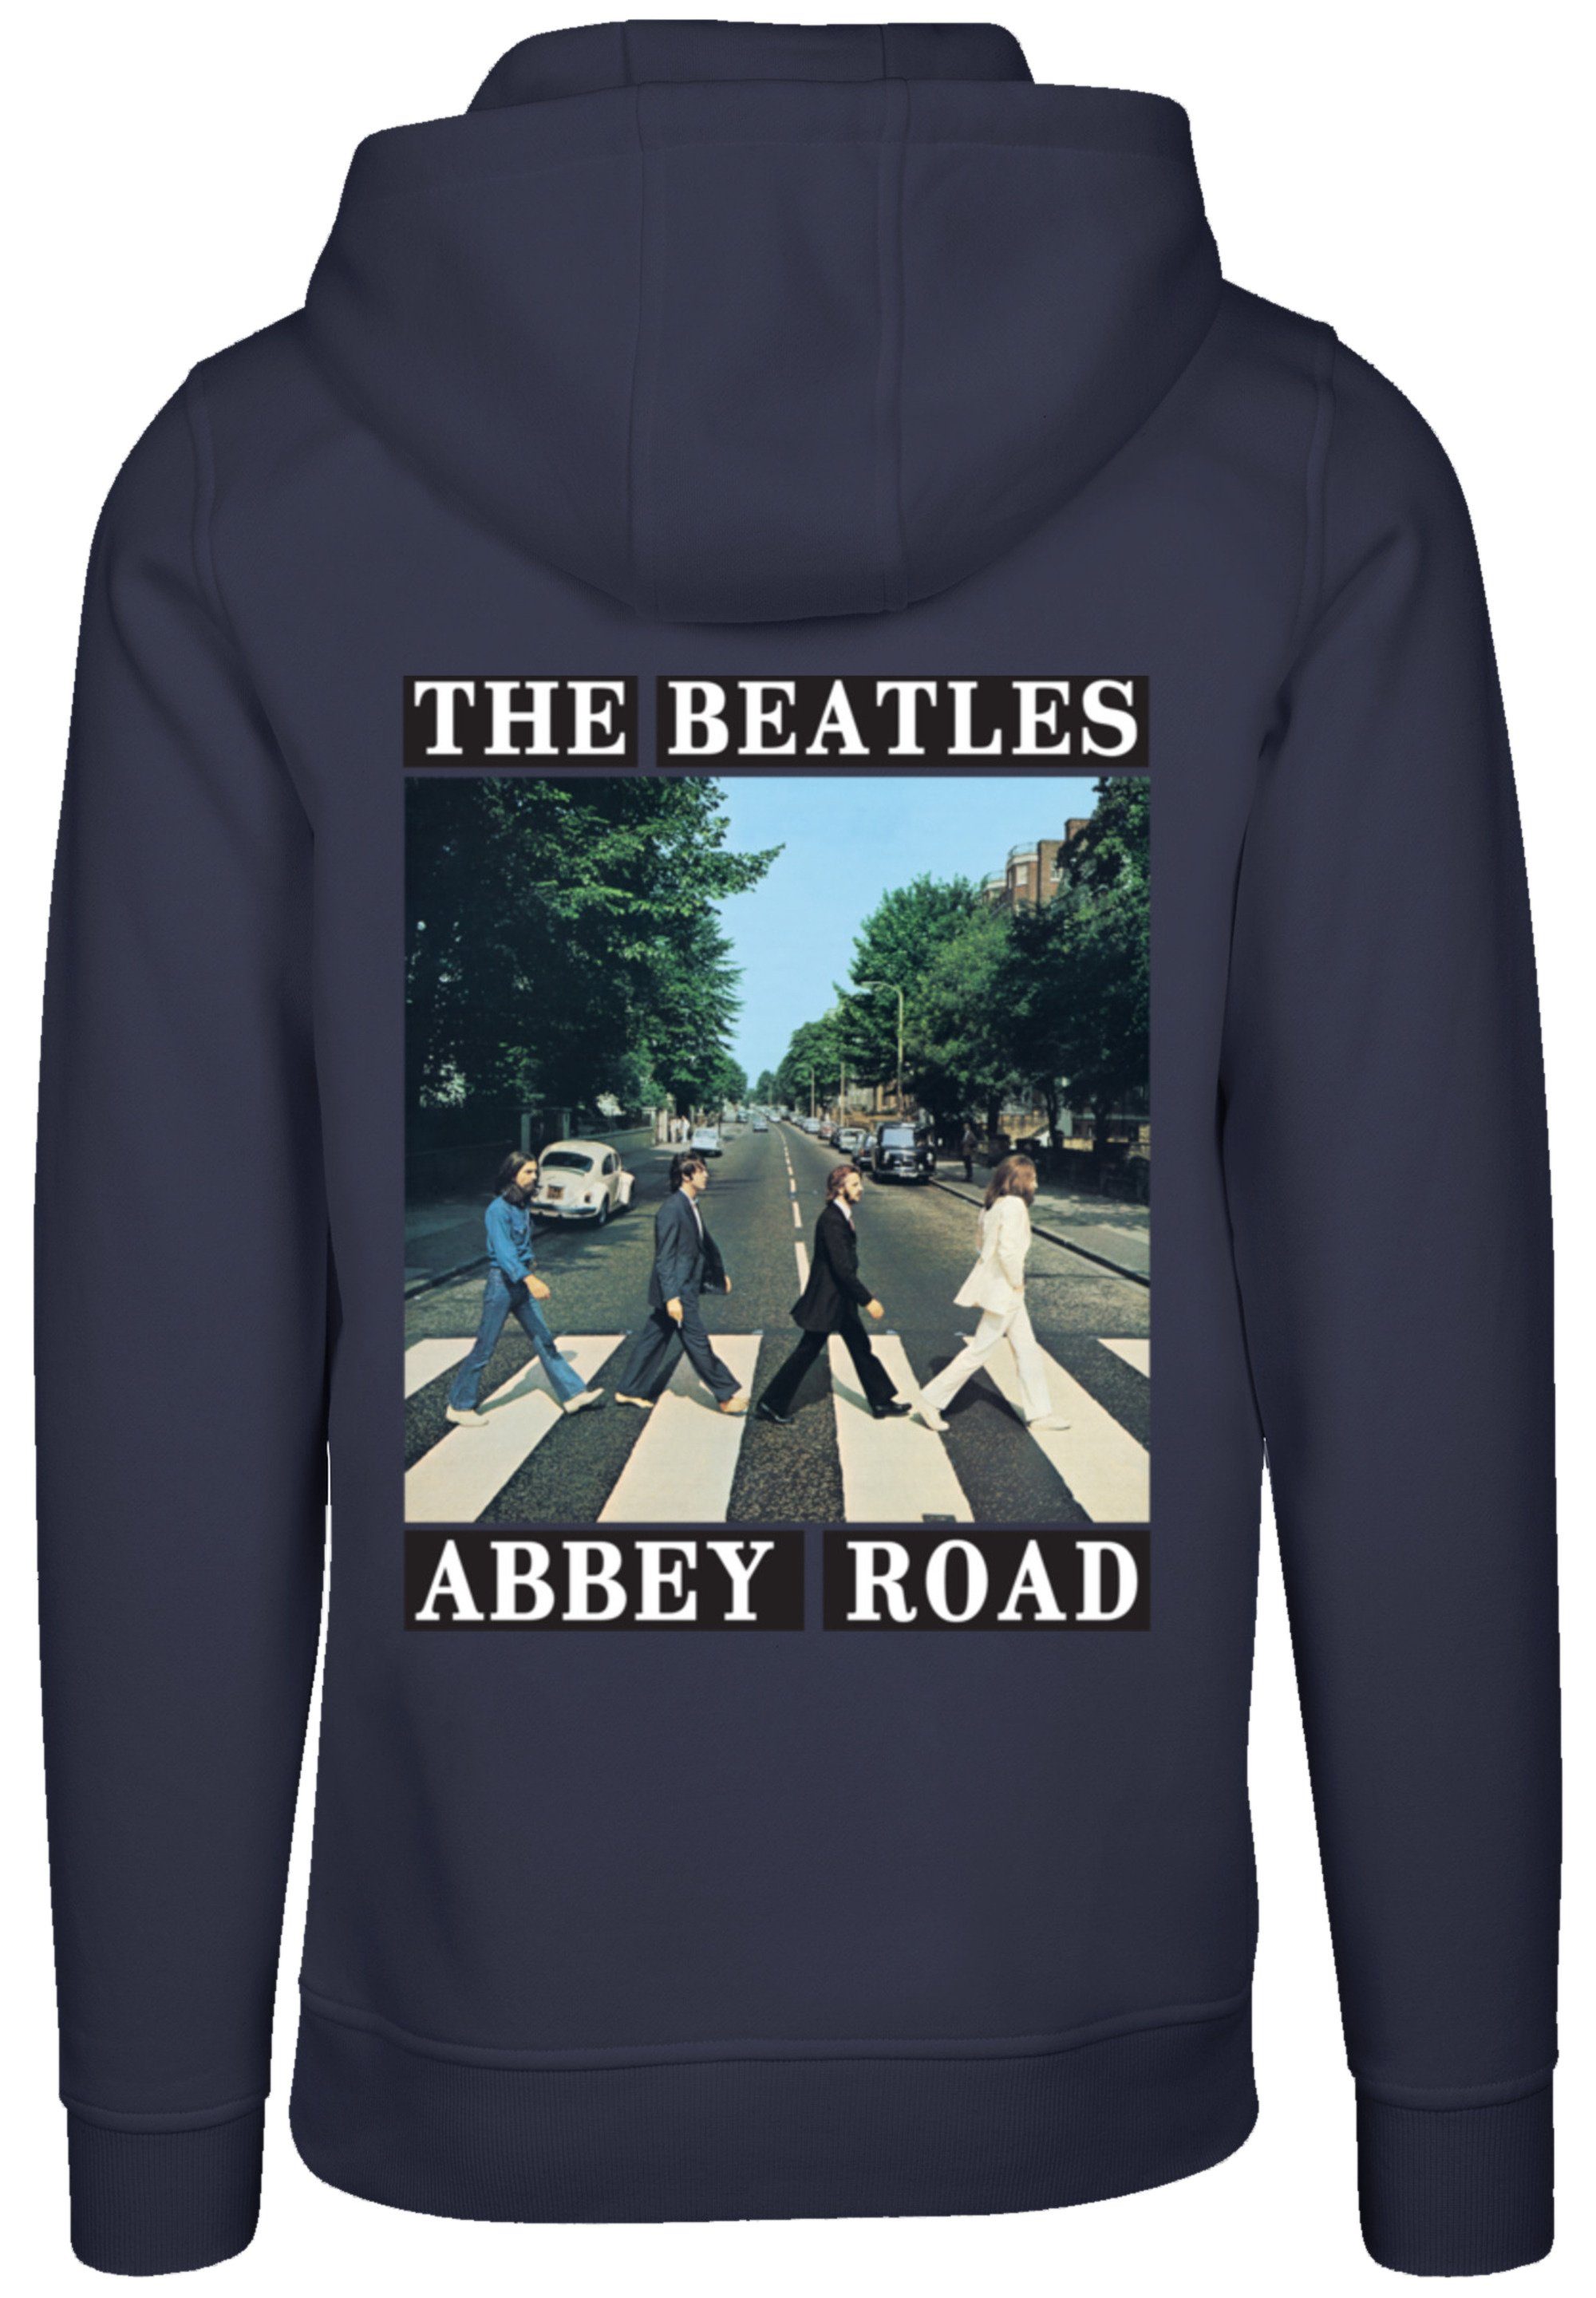 F4NT4STIC Kapuzenpullover The Beatles Abbey Road Rock Musik Band Hoodie, Warm, Bequem navy